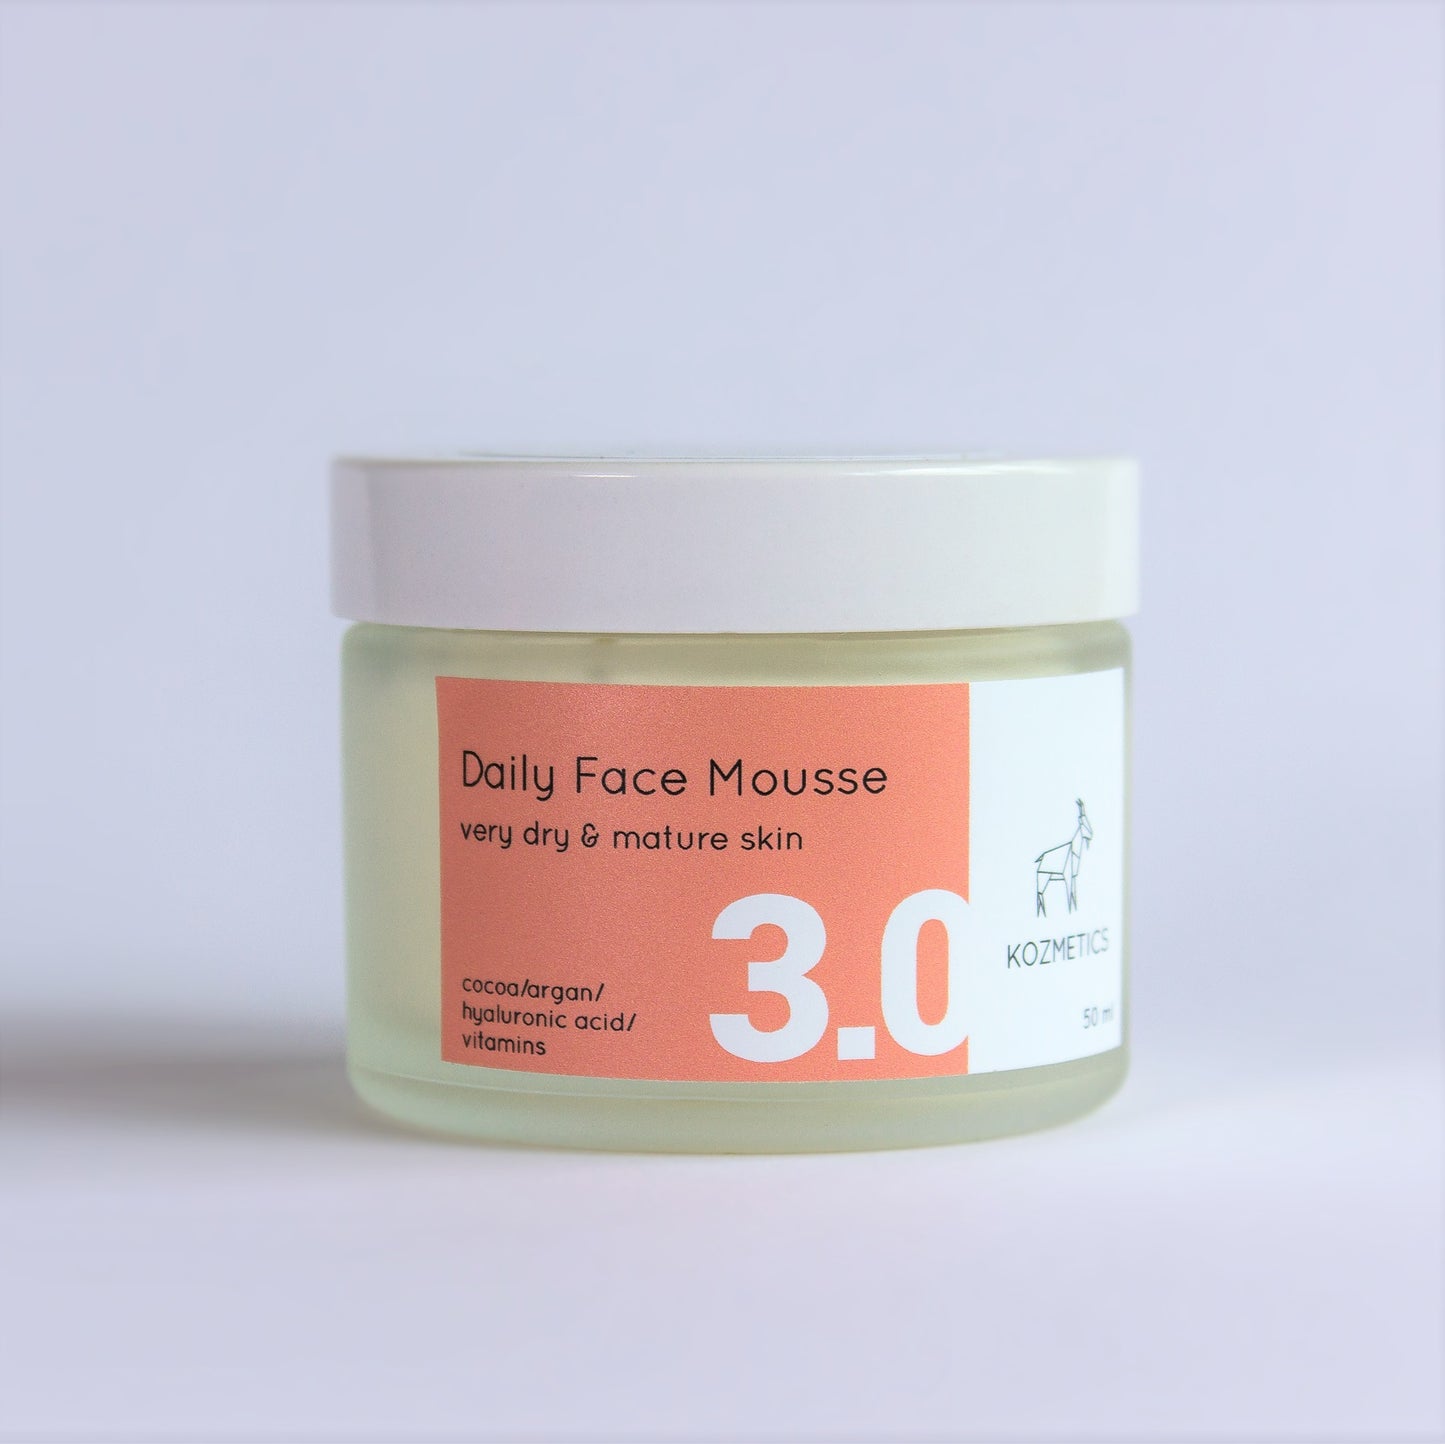 Daily Face Mousse 3.0 for Very Dry and Mature Skin